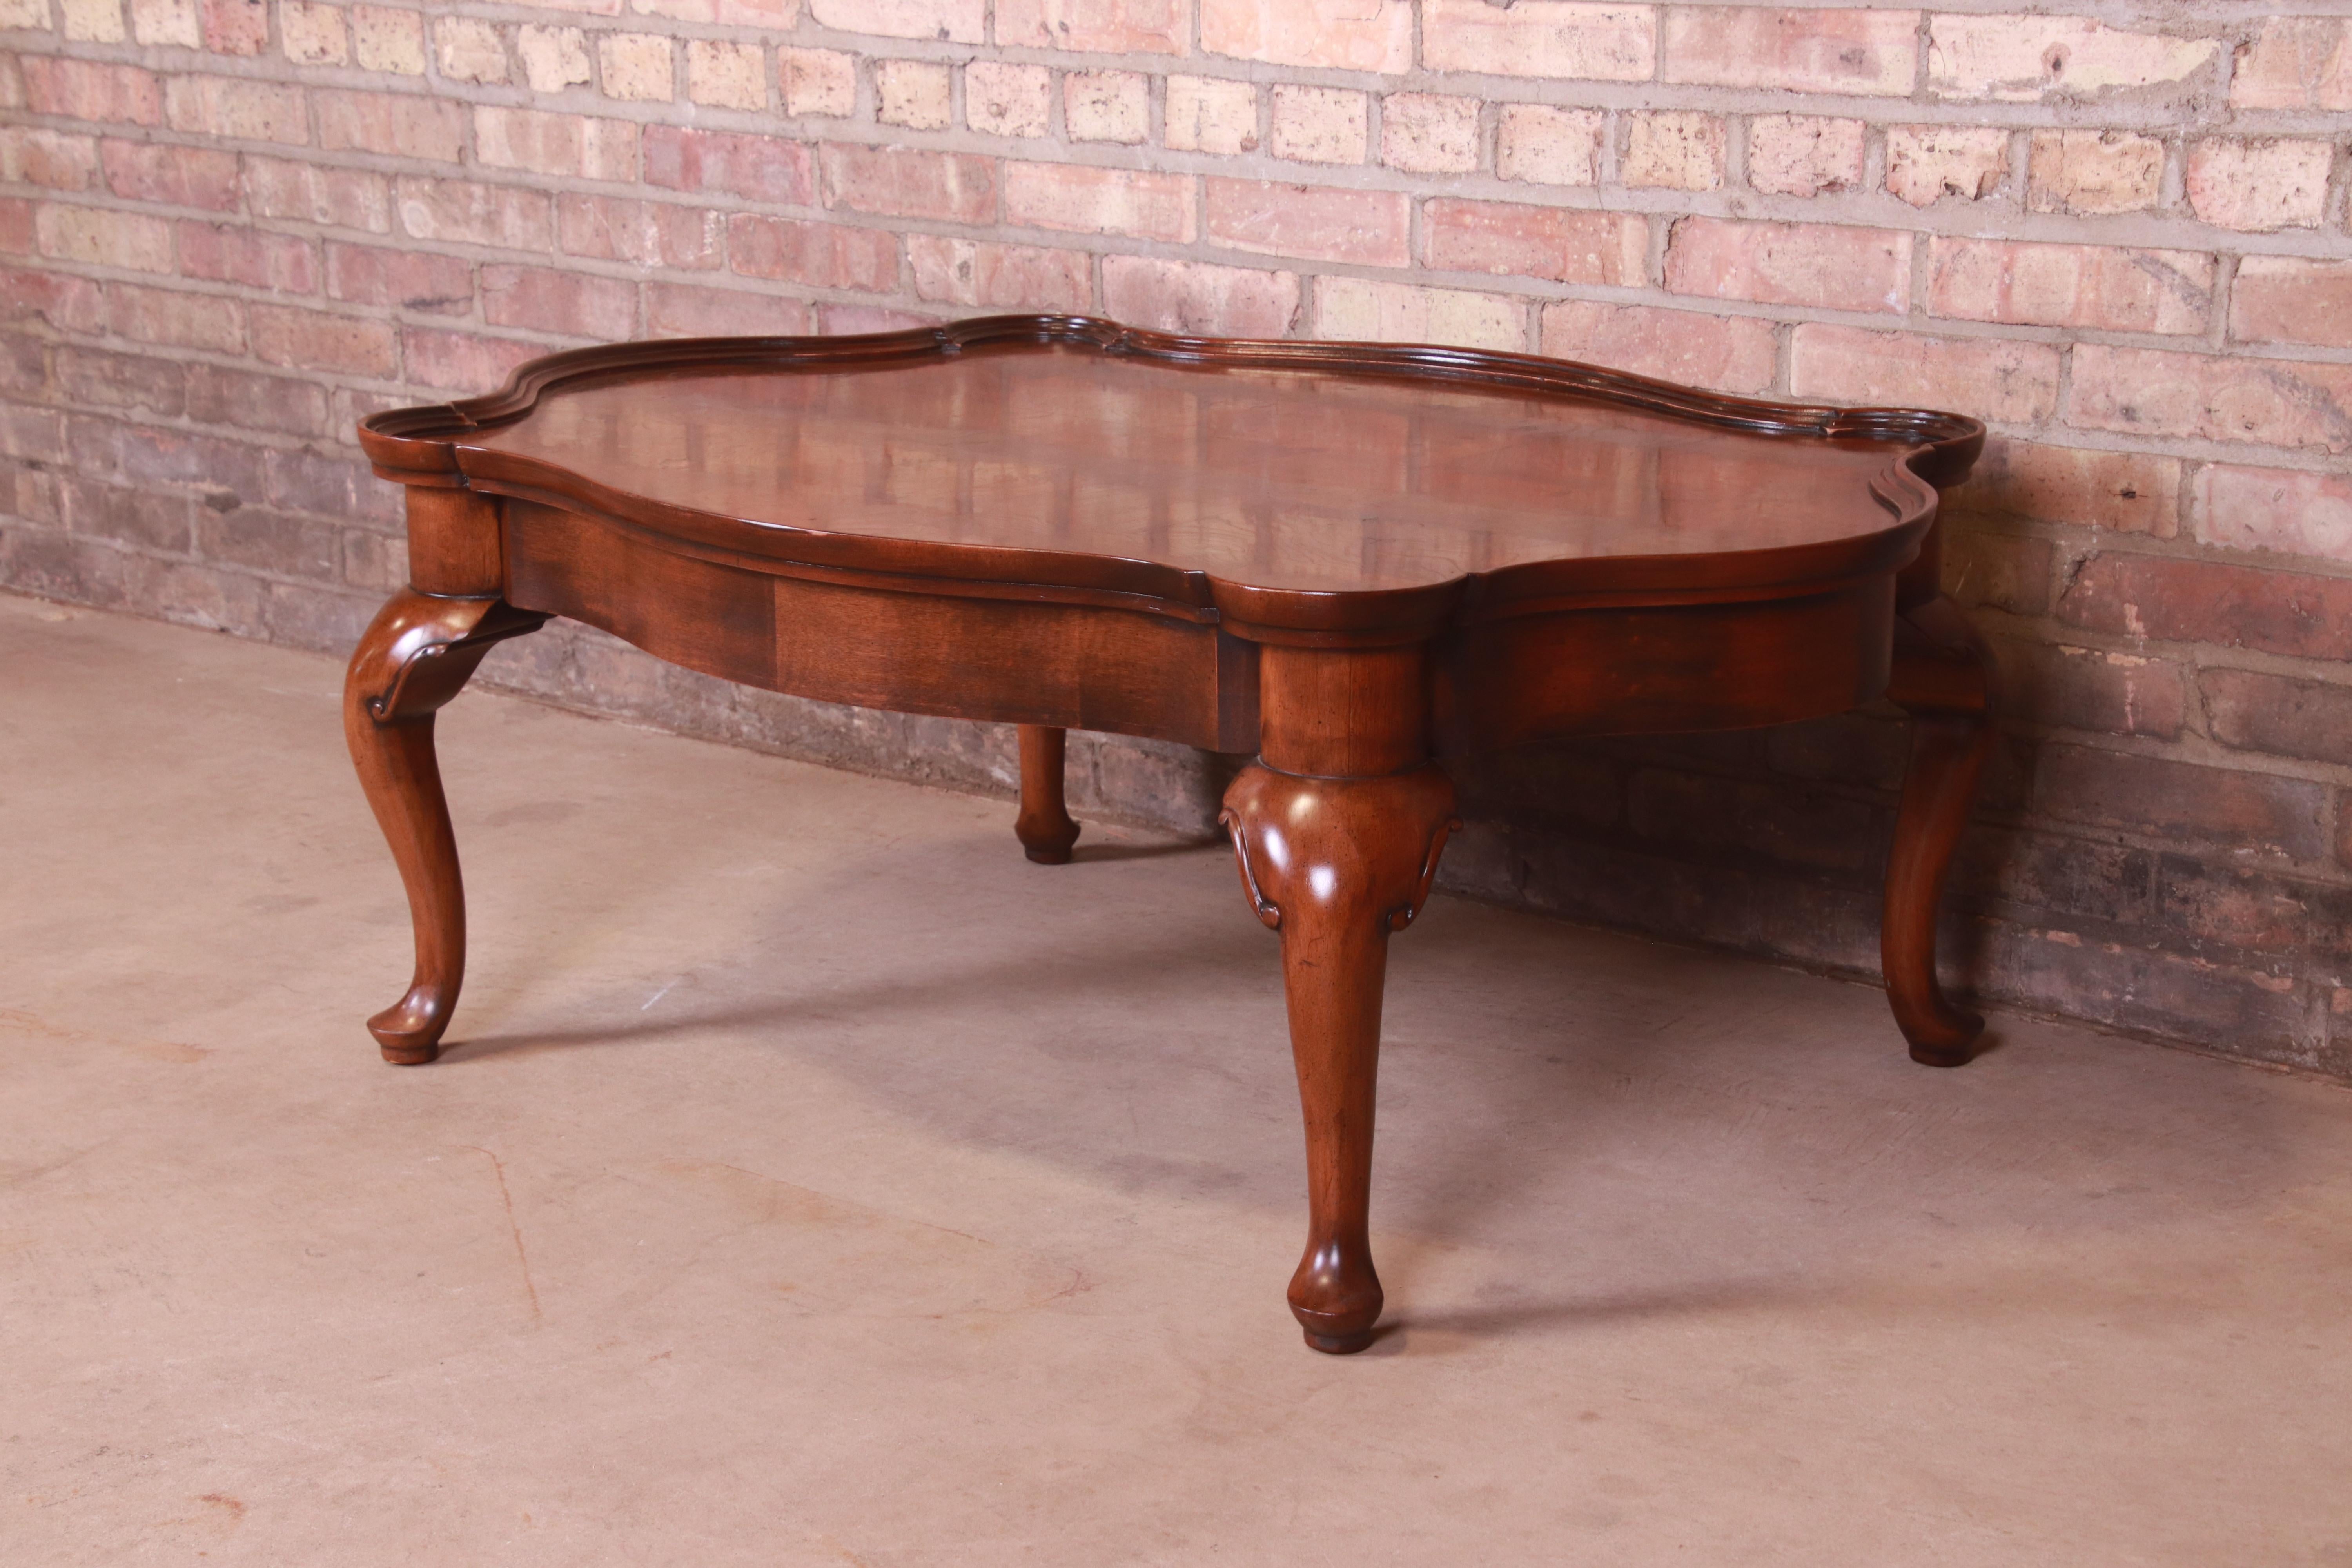 20th Century French Provincial Mahogany and Burl Coffee Table Attributed to Baker Furniture